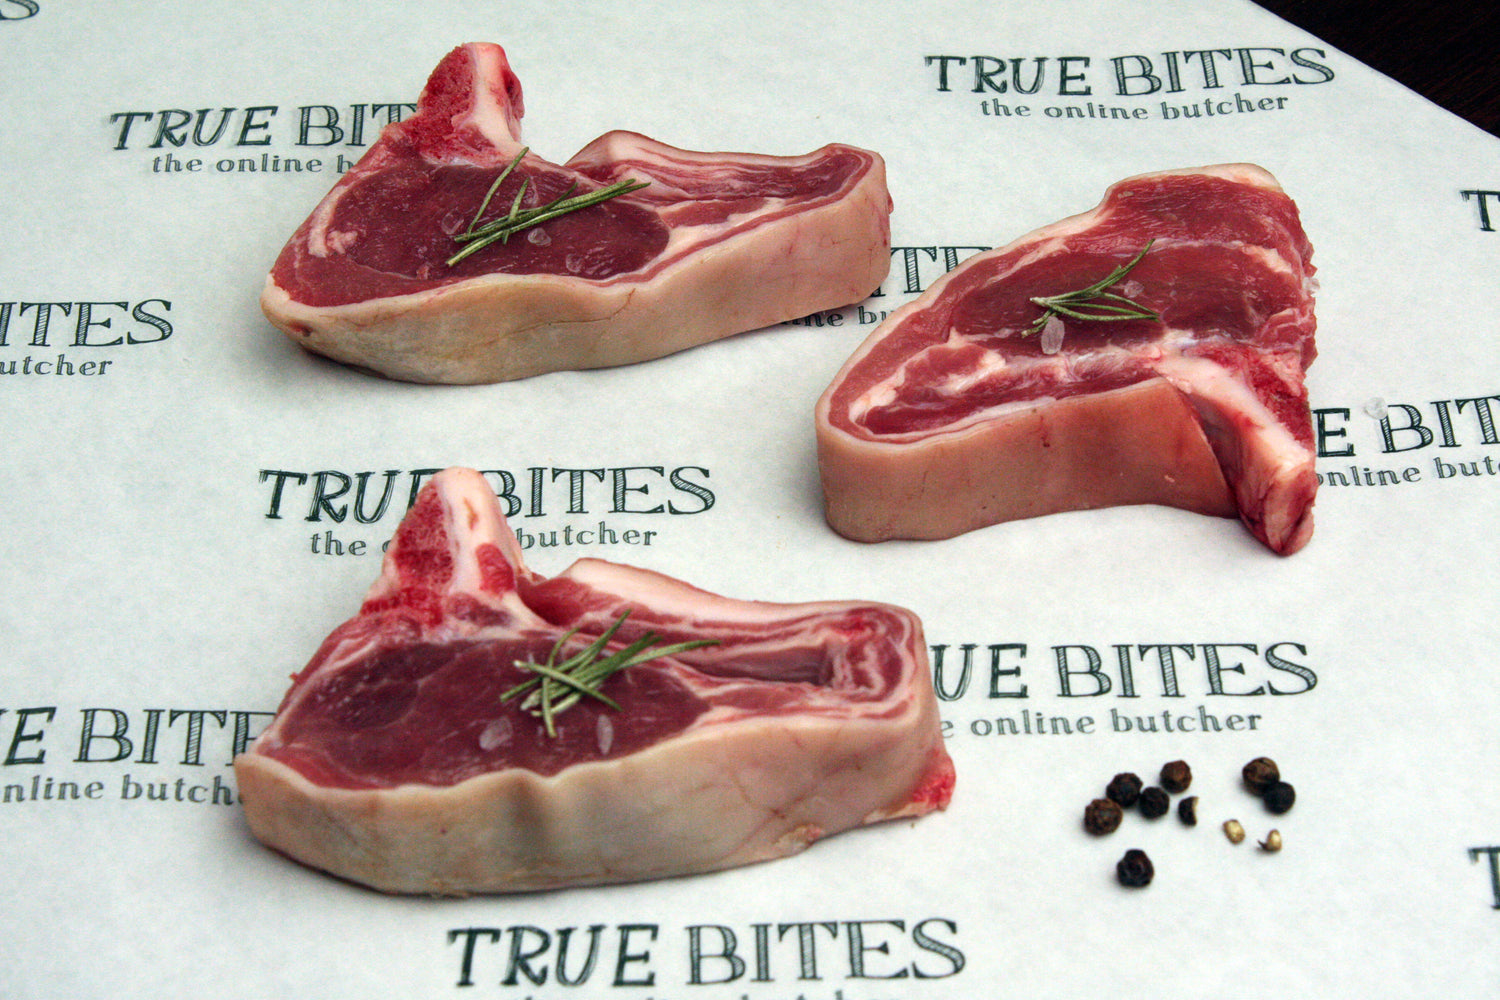 lamb loin chops pictured on true bites branded greaseproof paper 